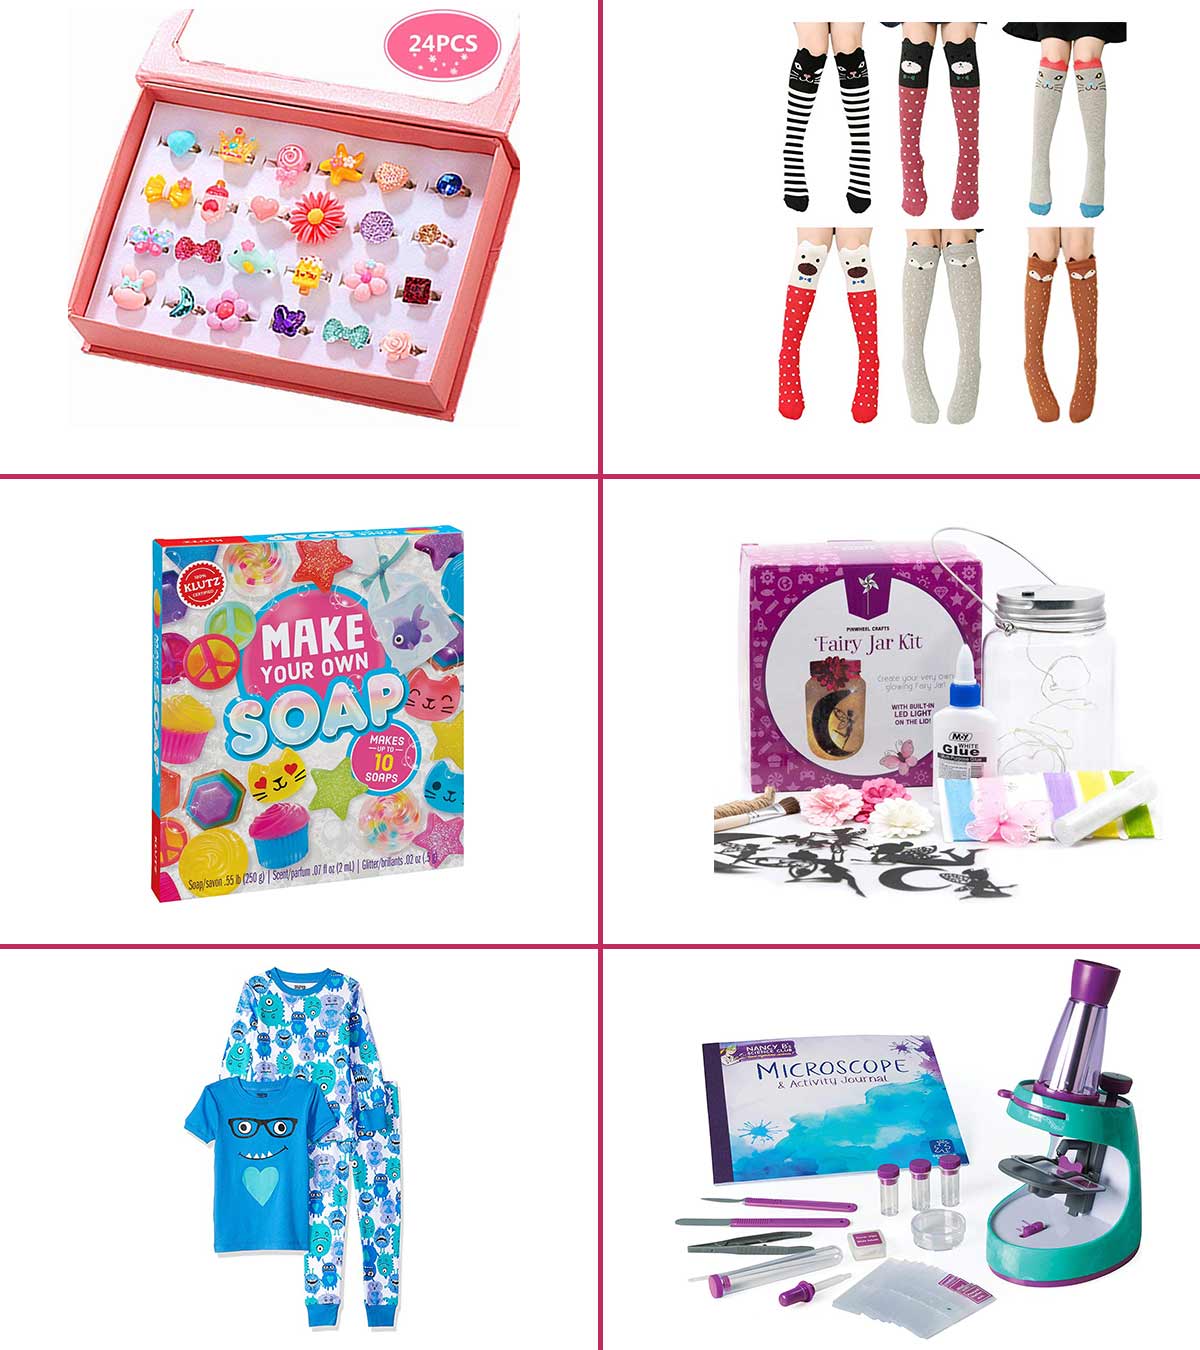 https://www.momjunction.com/wp-content/uploads/2019/12/19-Best-Gifts-For-10-Year-Old-Girls-To-Buy-In-2019.jpg